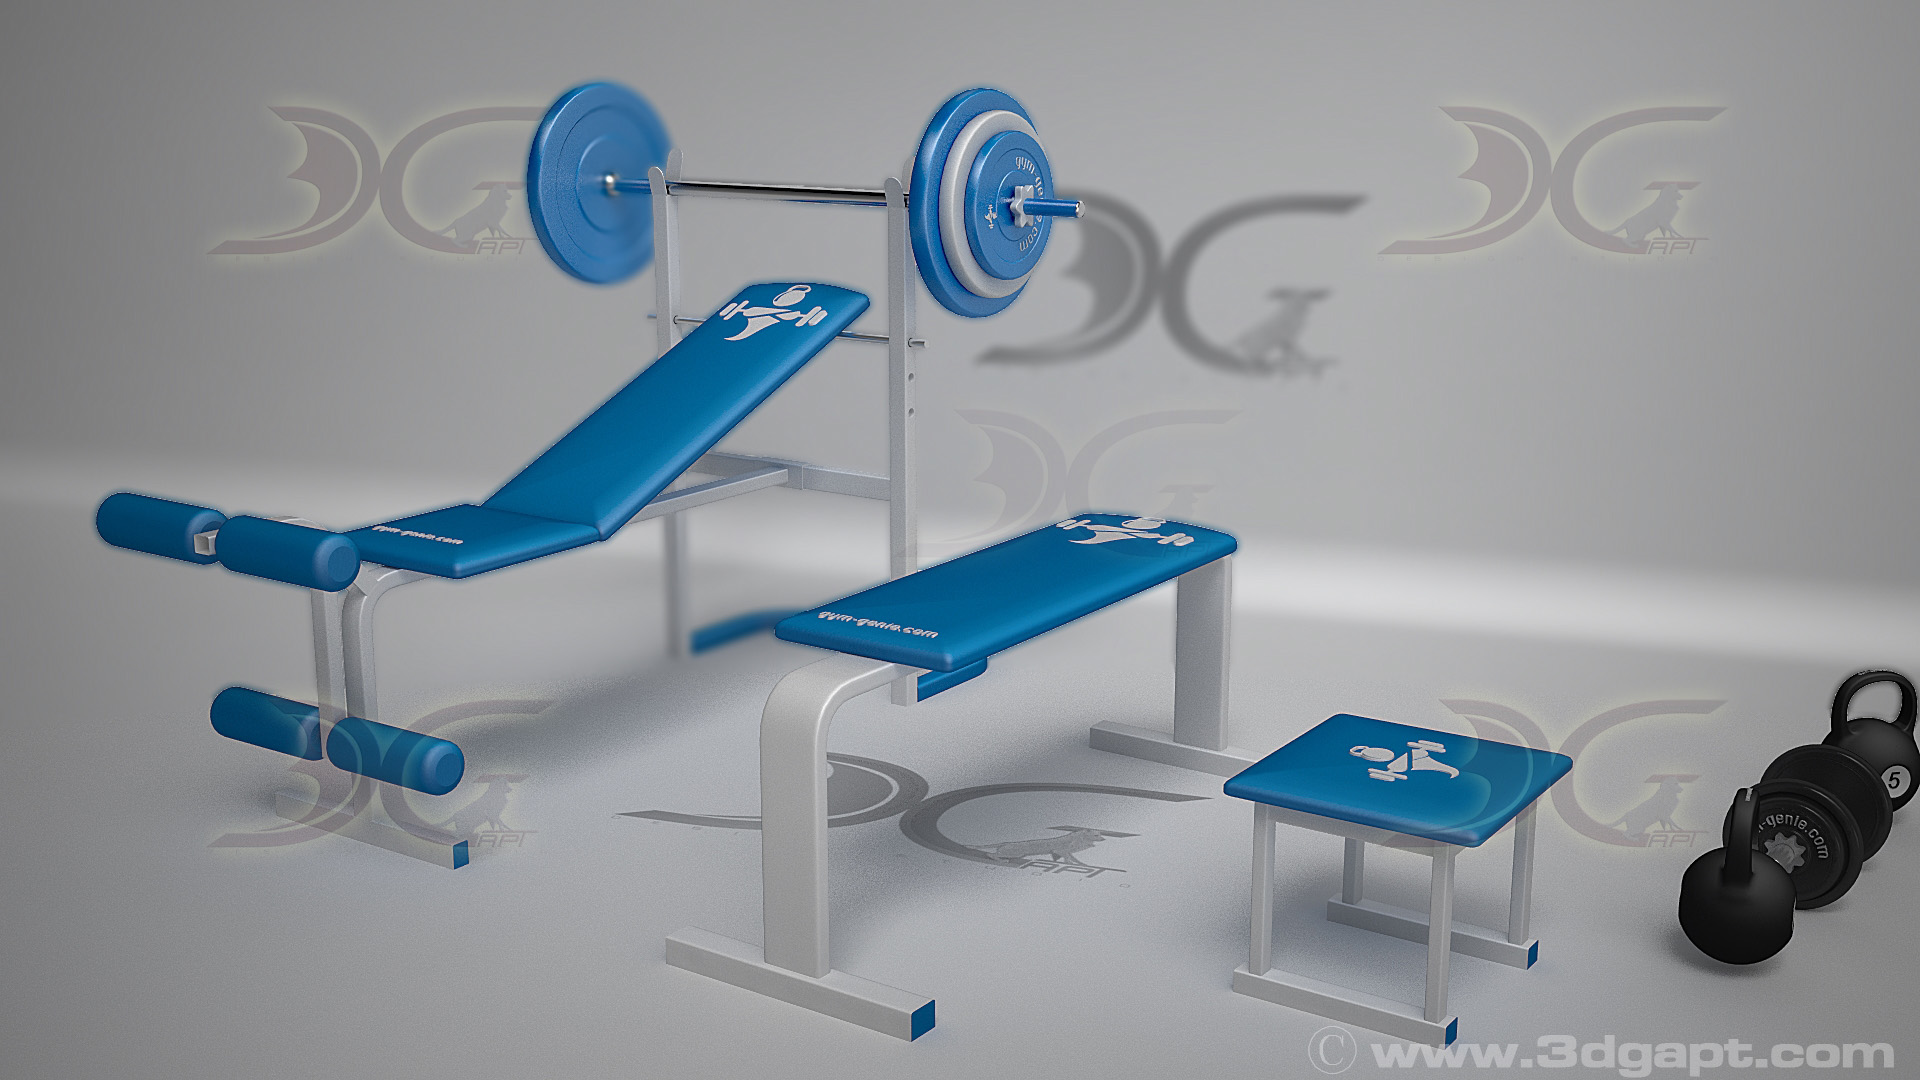 Fitness Equipment and animation of basic exercises